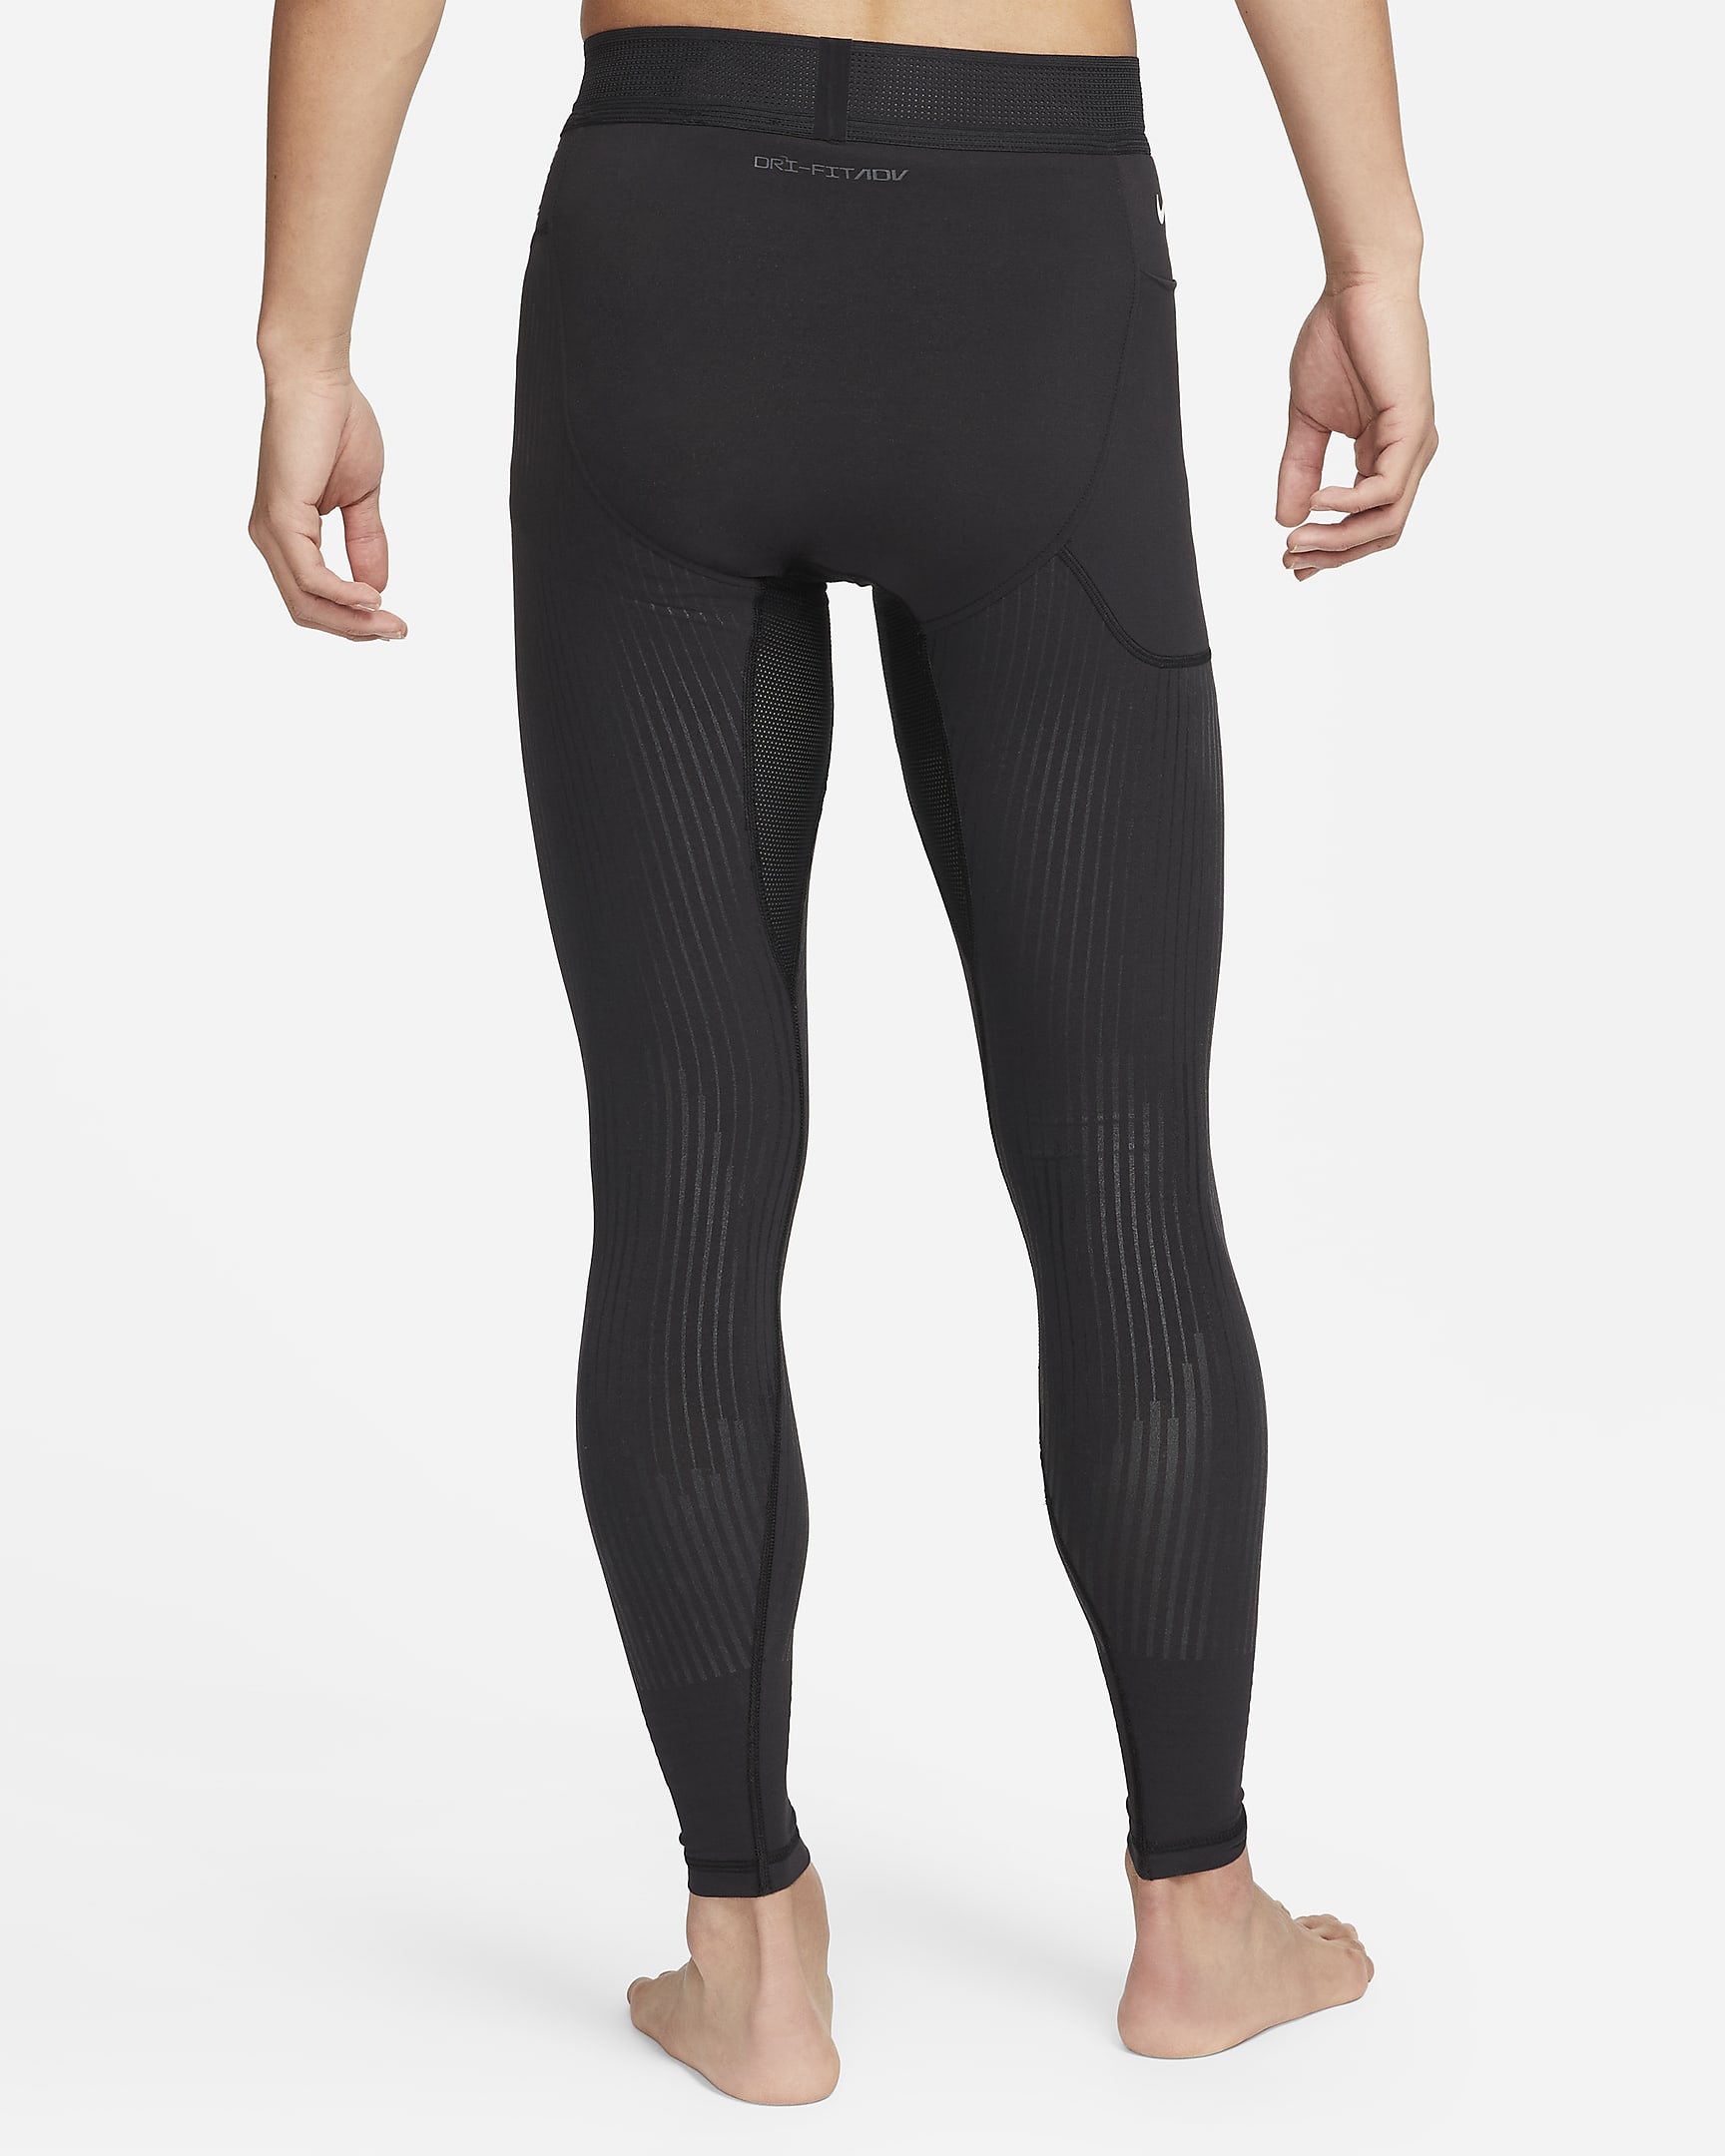 Nike Dri-FIT ADV A.P.S. Men's Recovery Training Tights. Nike IN